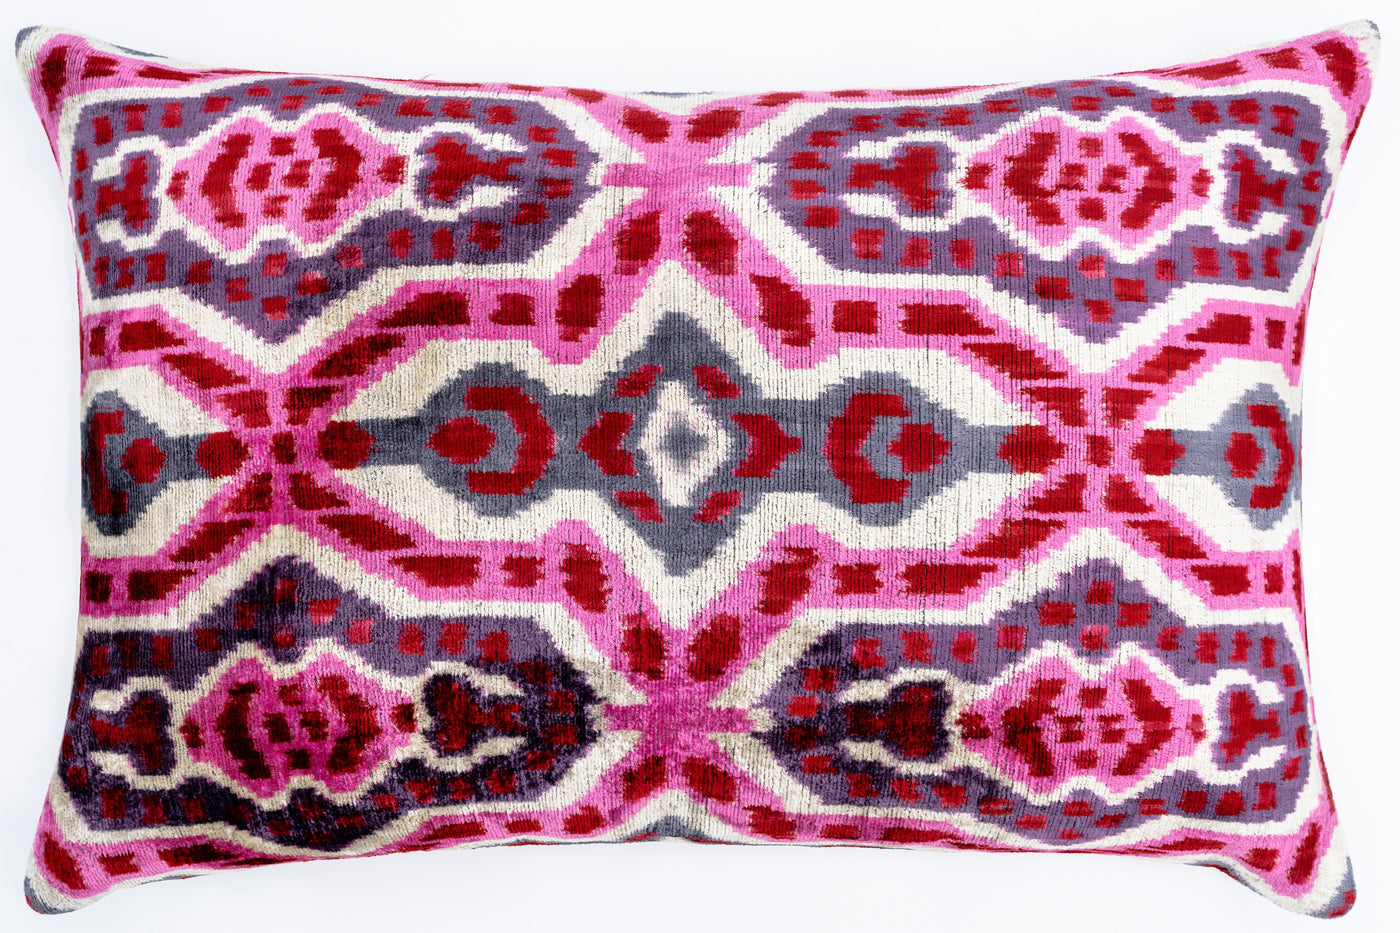 Canvello Artisan-Crafted 16x24 Inch Decorative Pillow with Geometric and Floral - Vibrant Colors Symmetrical Design - Down Insert INCLUDED